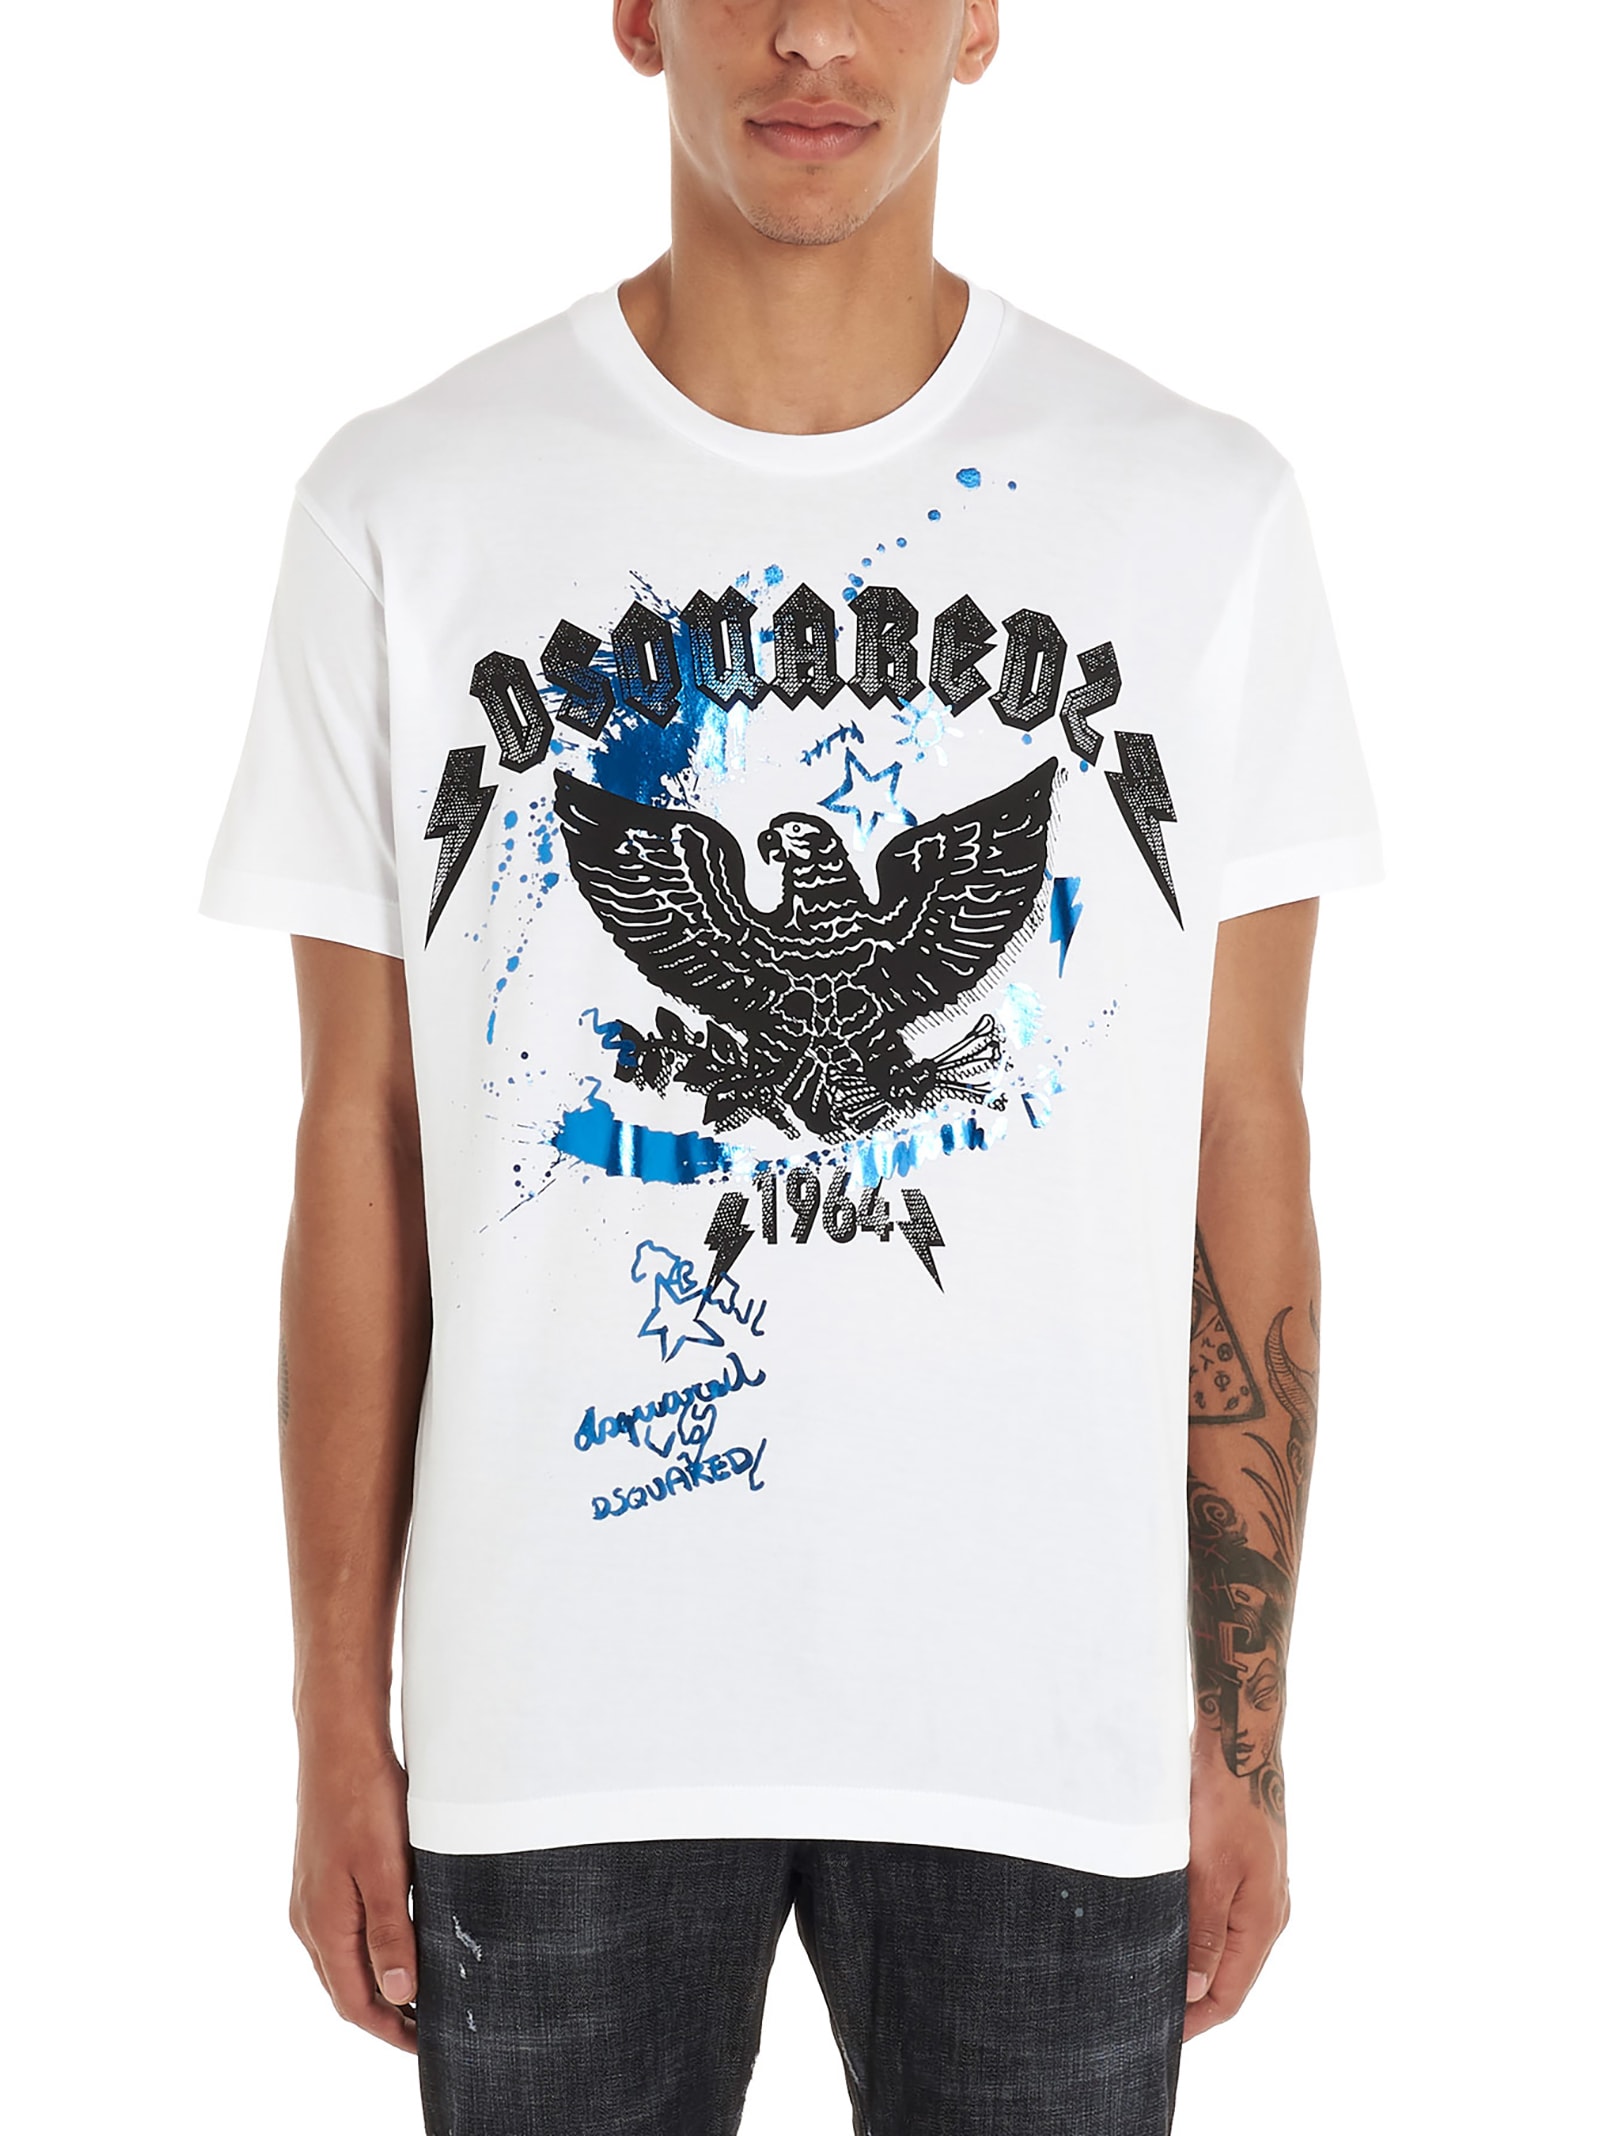 white and blue dsquared t shirt